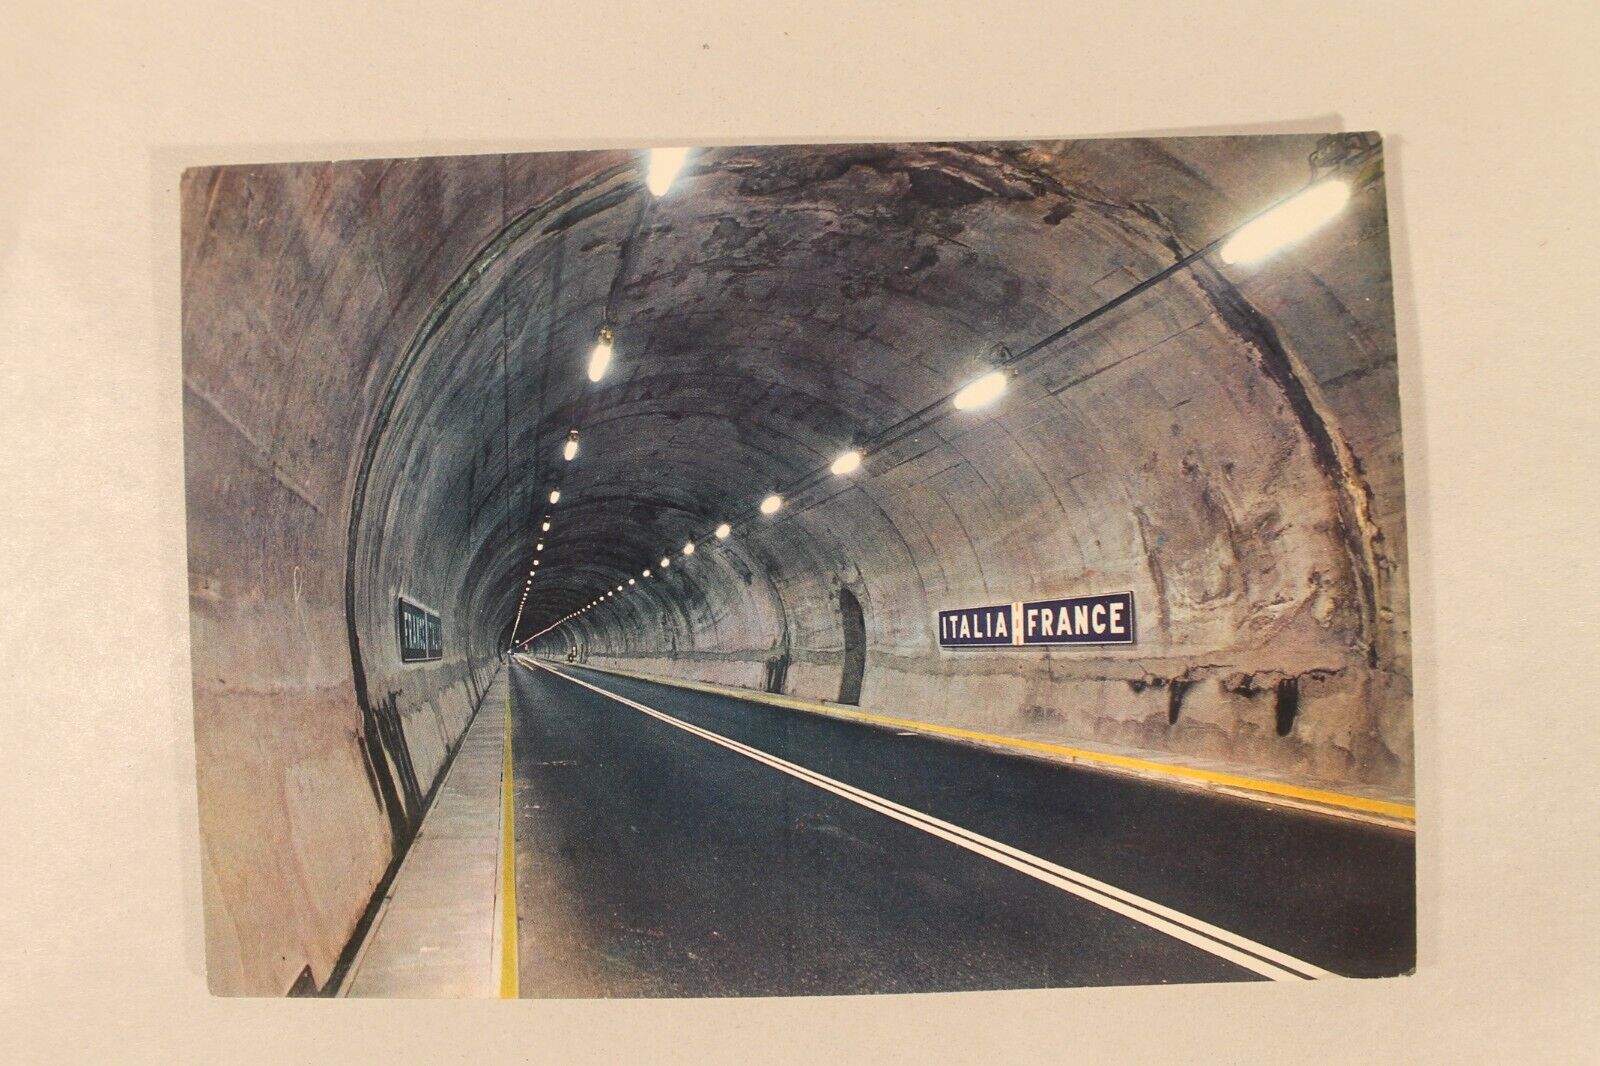 Mont Blanc Tunnel Postcard Showing The Border of France & Italy - Unposted